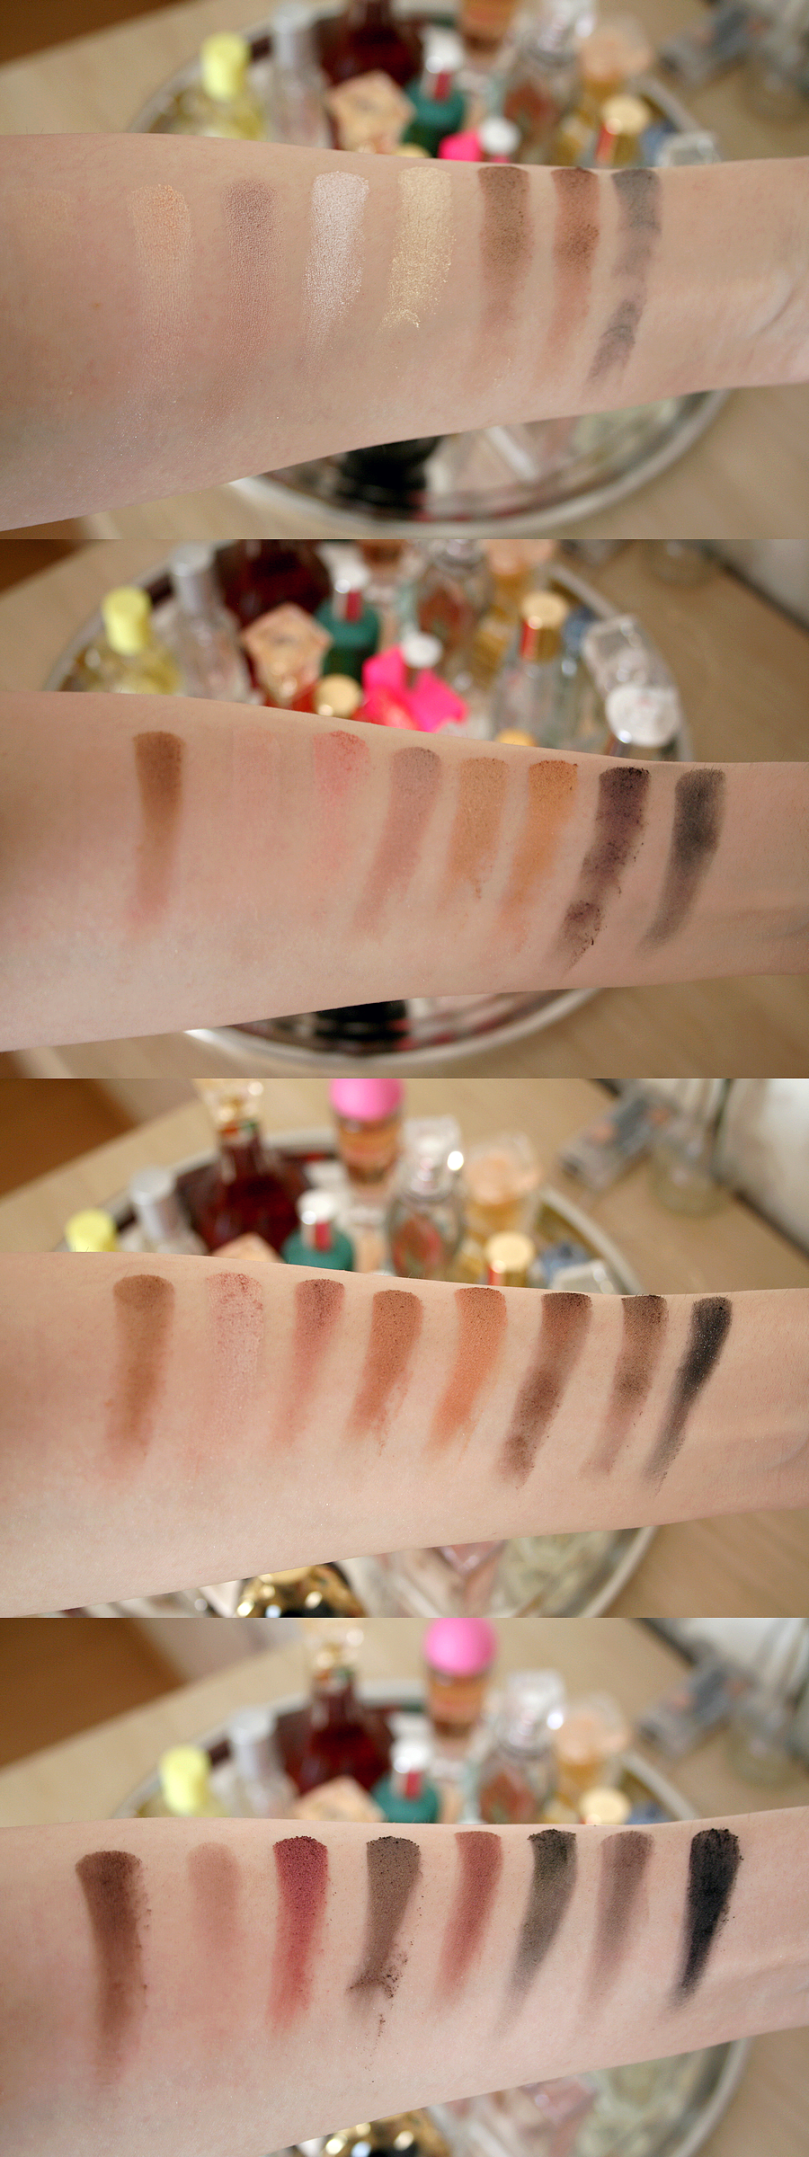 MUR Flawless Palette Swatches